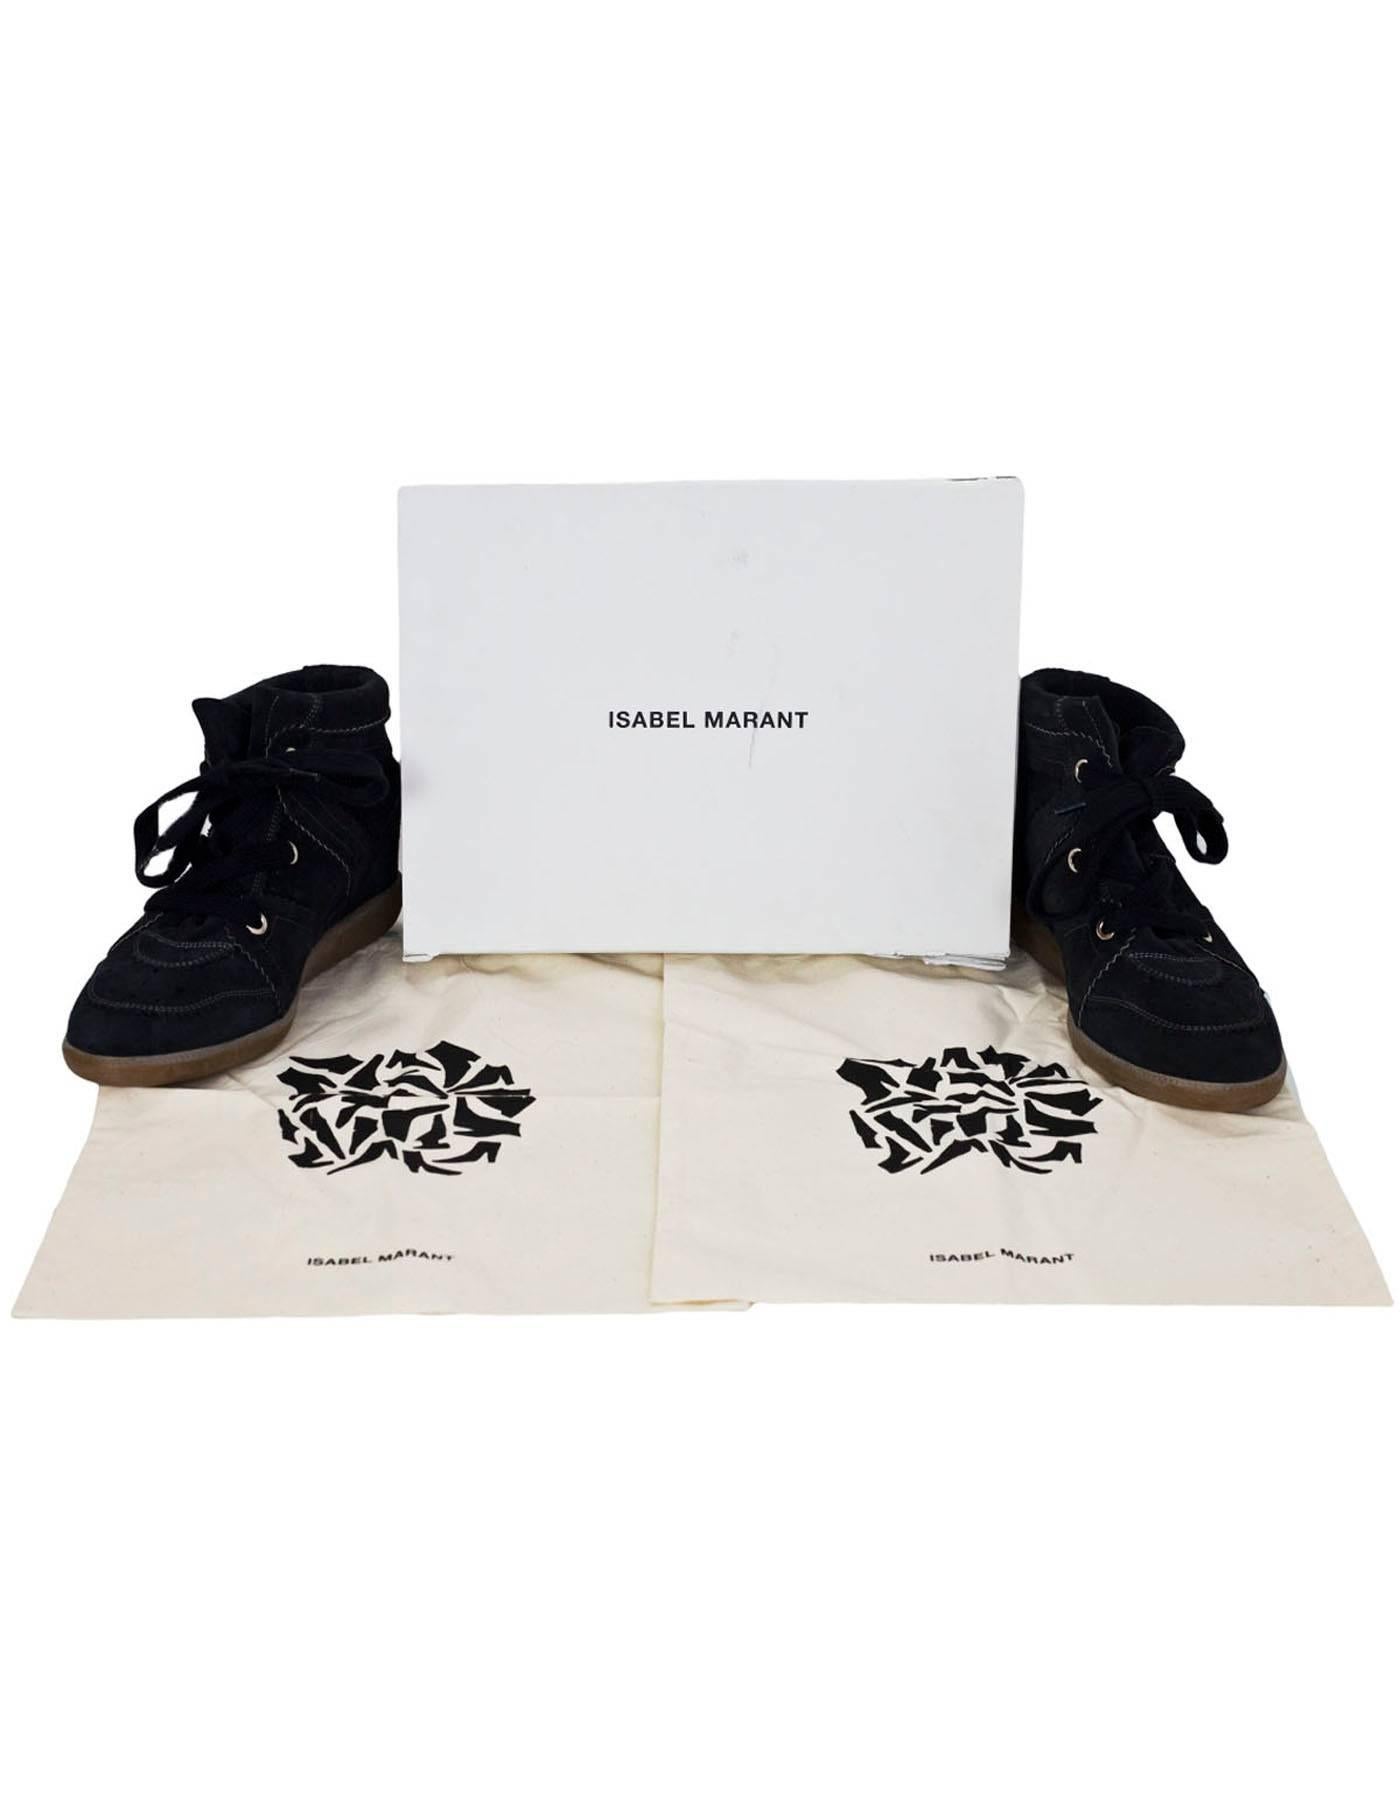 Isabel Marant Black Bobby Suede Wedge Sneakers Sz 41 with Box 1